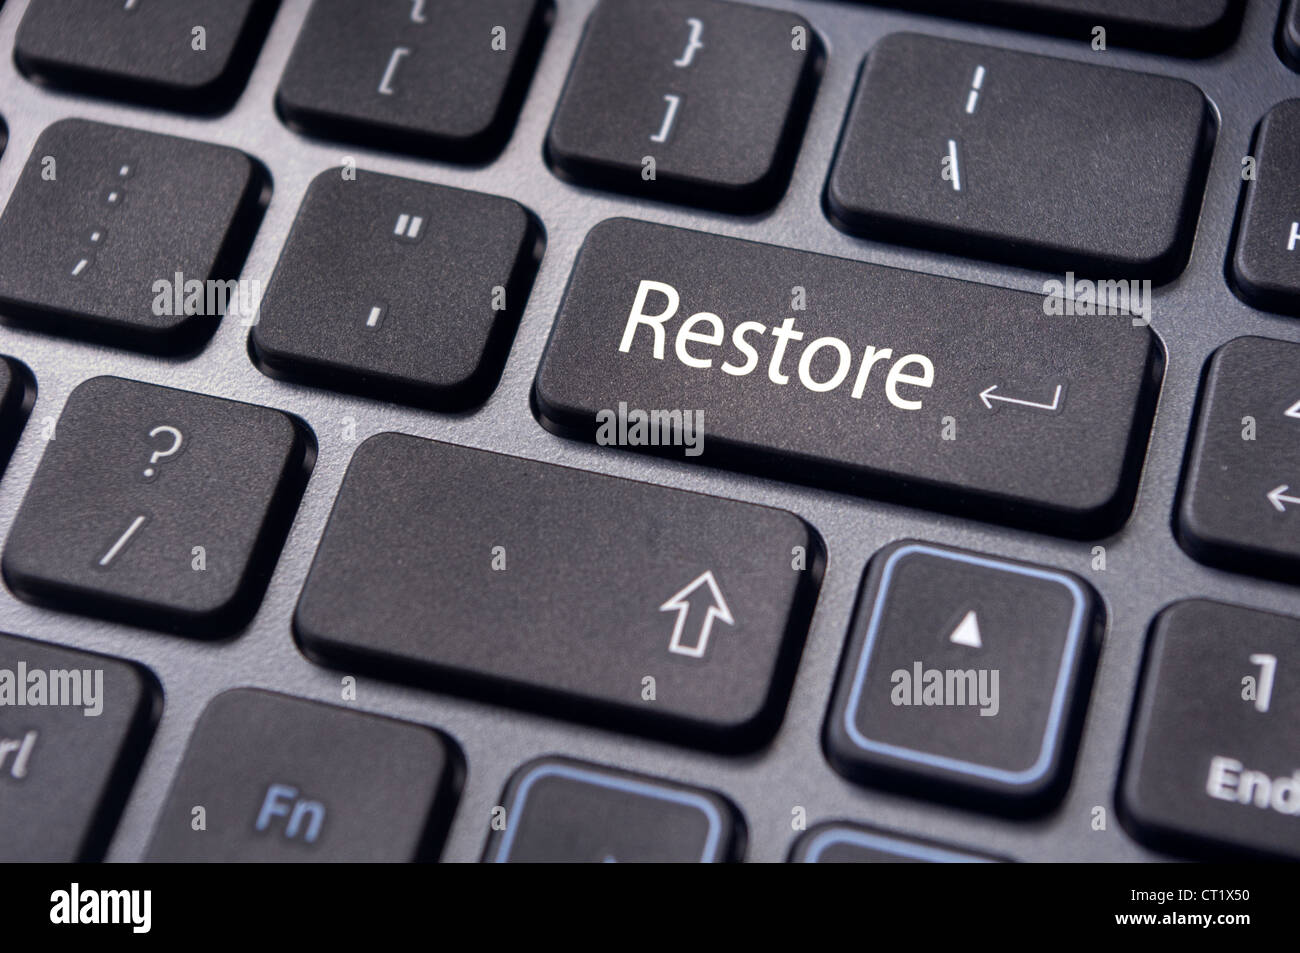 restore concepts, with a message on enter key of keyboard. Stock Photo